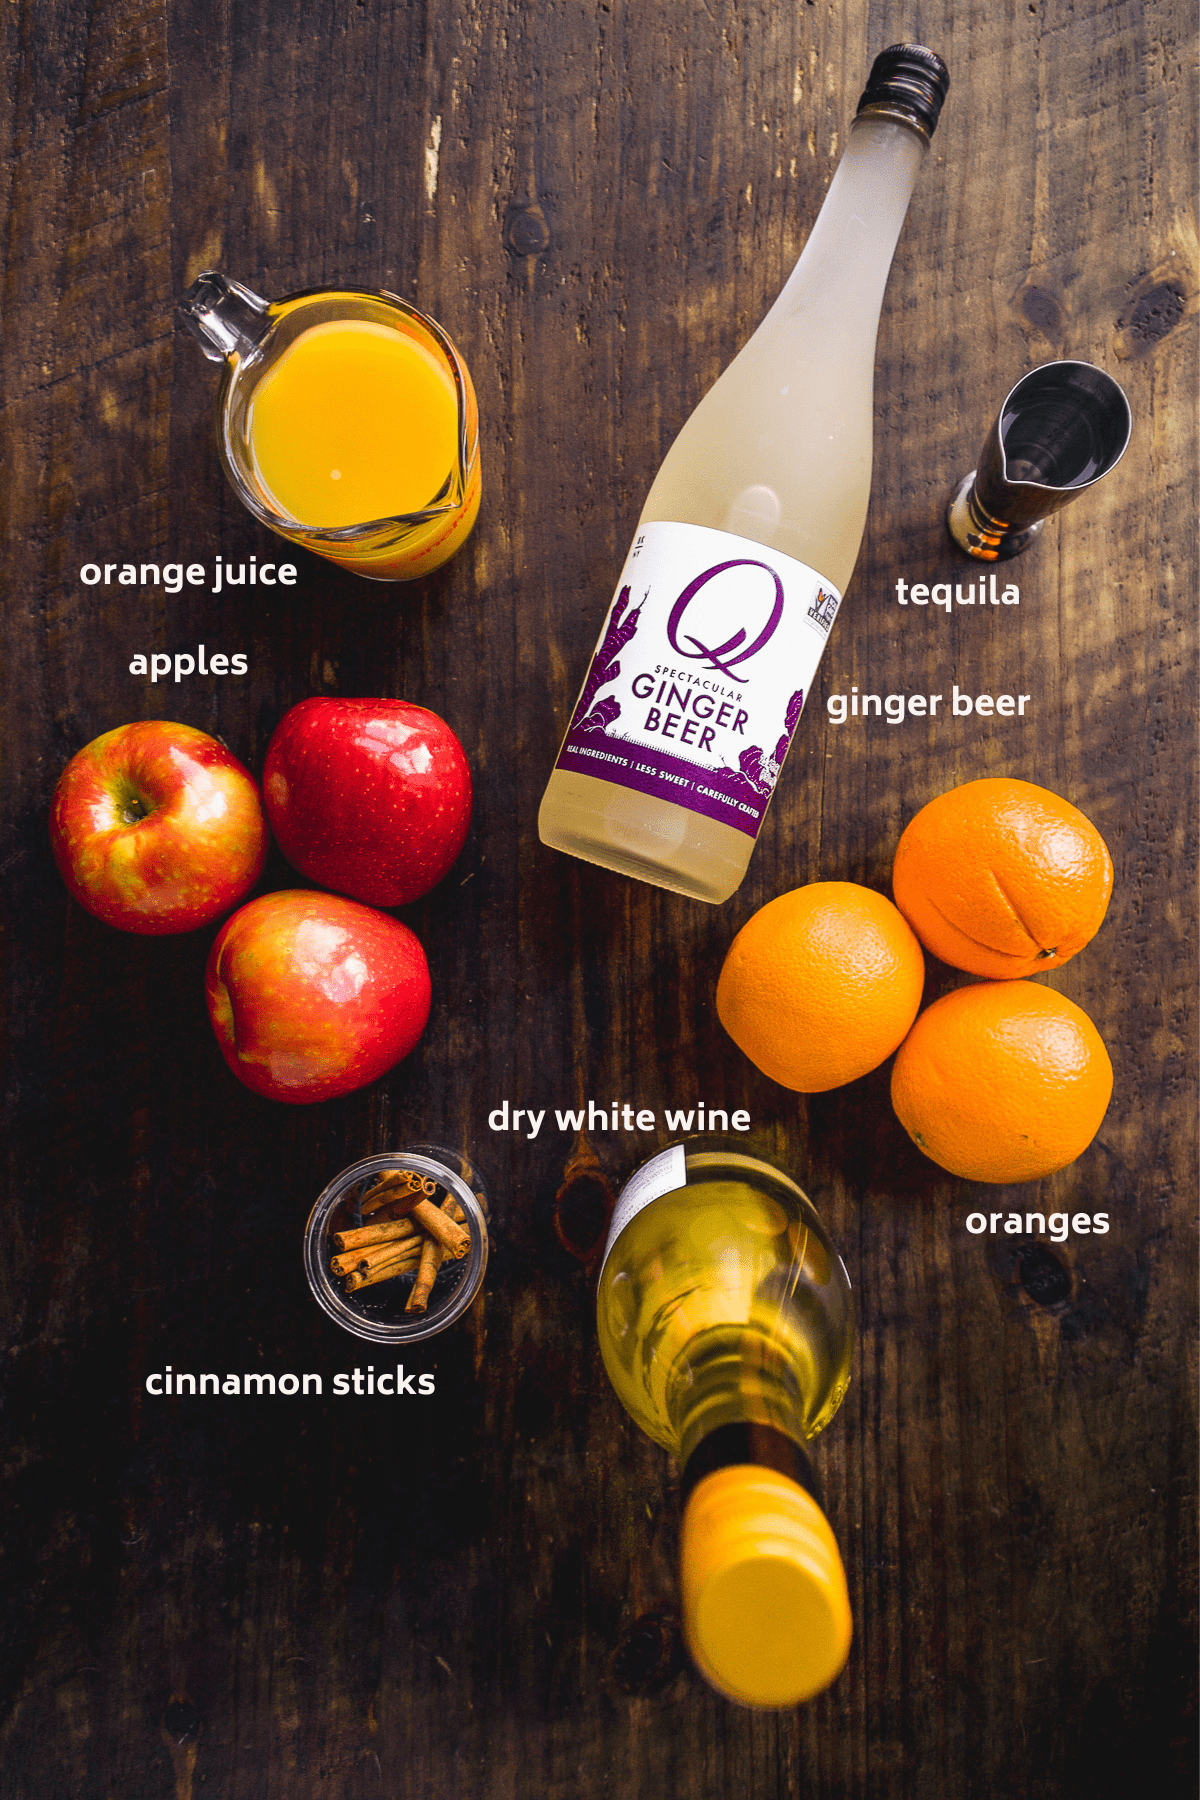 Image of thanksgiving sangria ingredients on a wooden surface with labels in white.